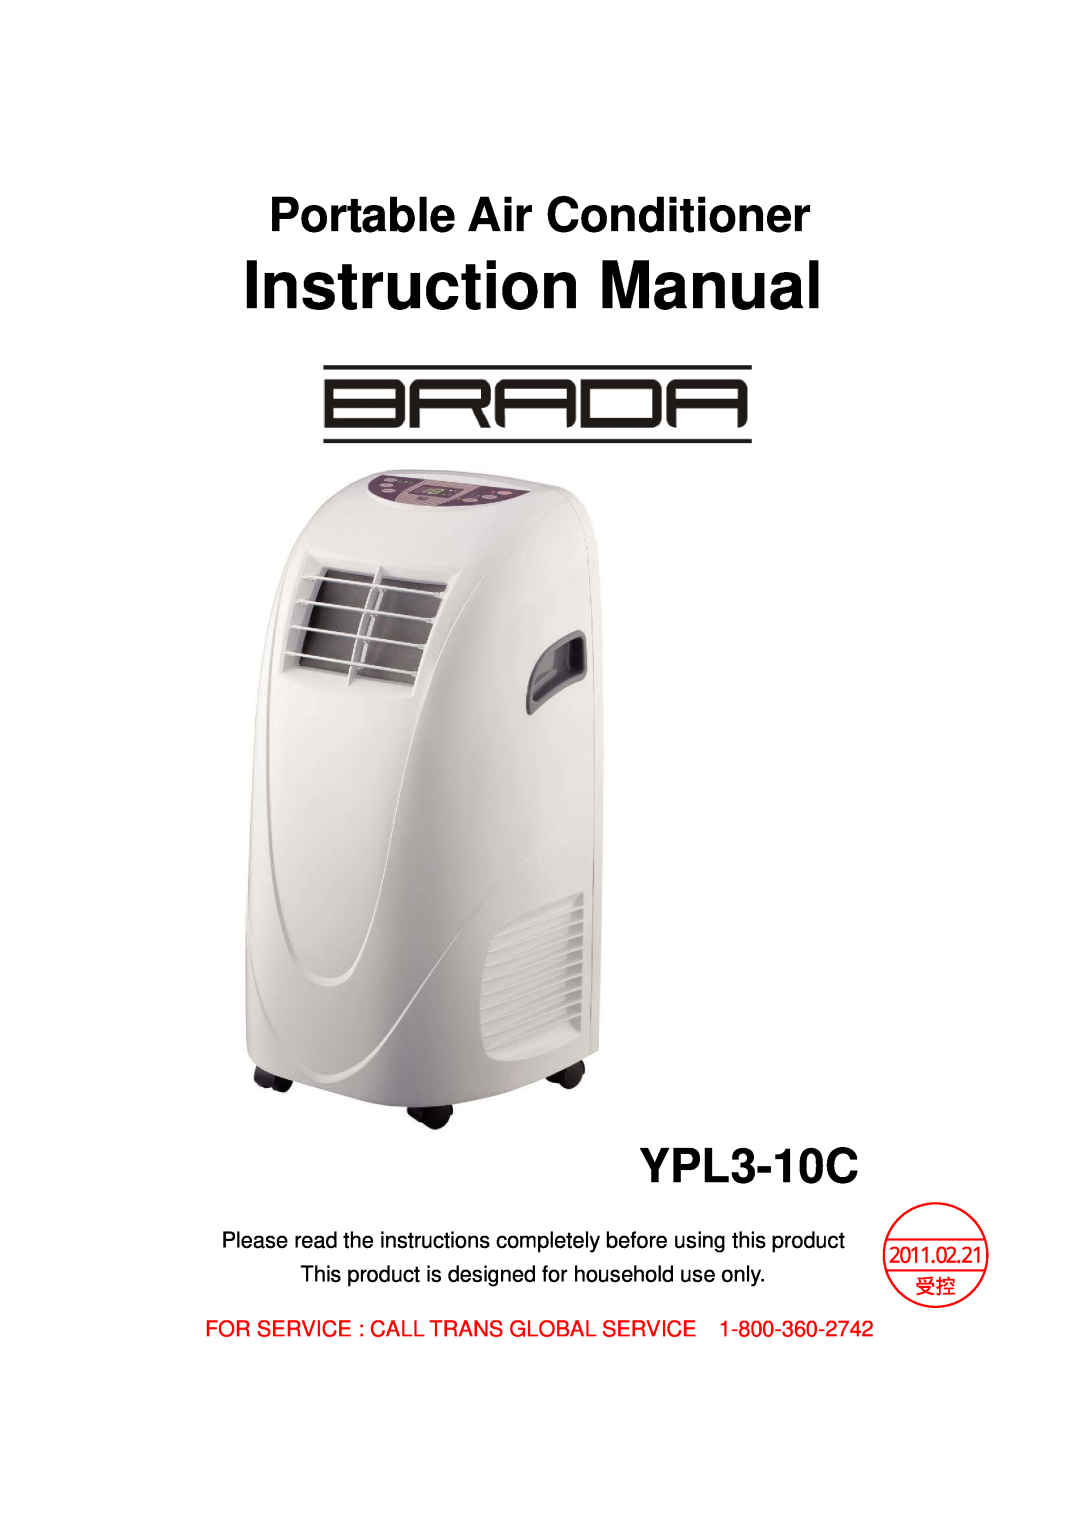 Brada Appliances YPL3-10C instruction manual Portable Air Conditioner, For Service Call Trans Global Service 